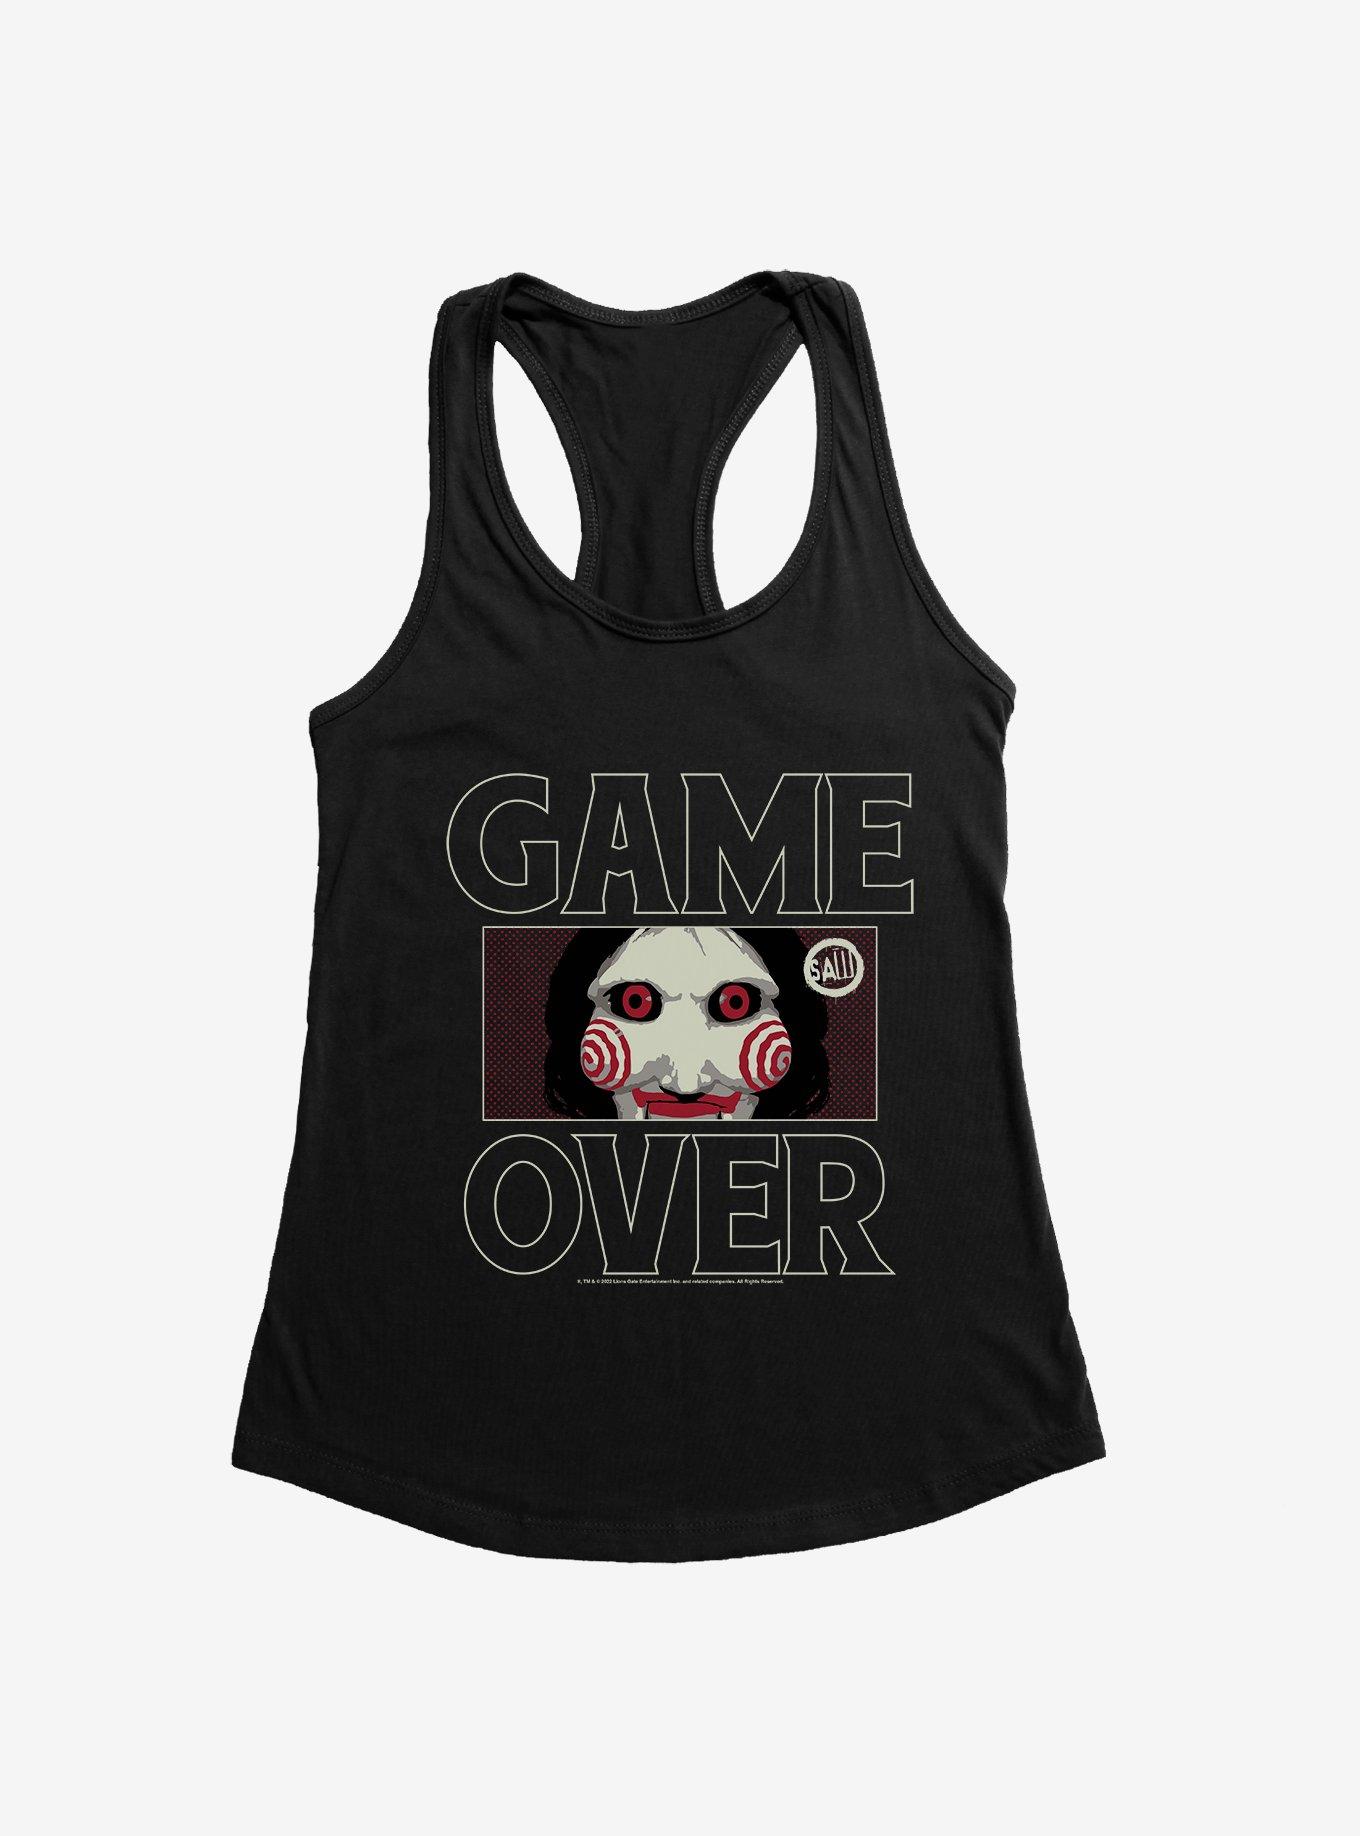 Saw Game Over Girls Tank